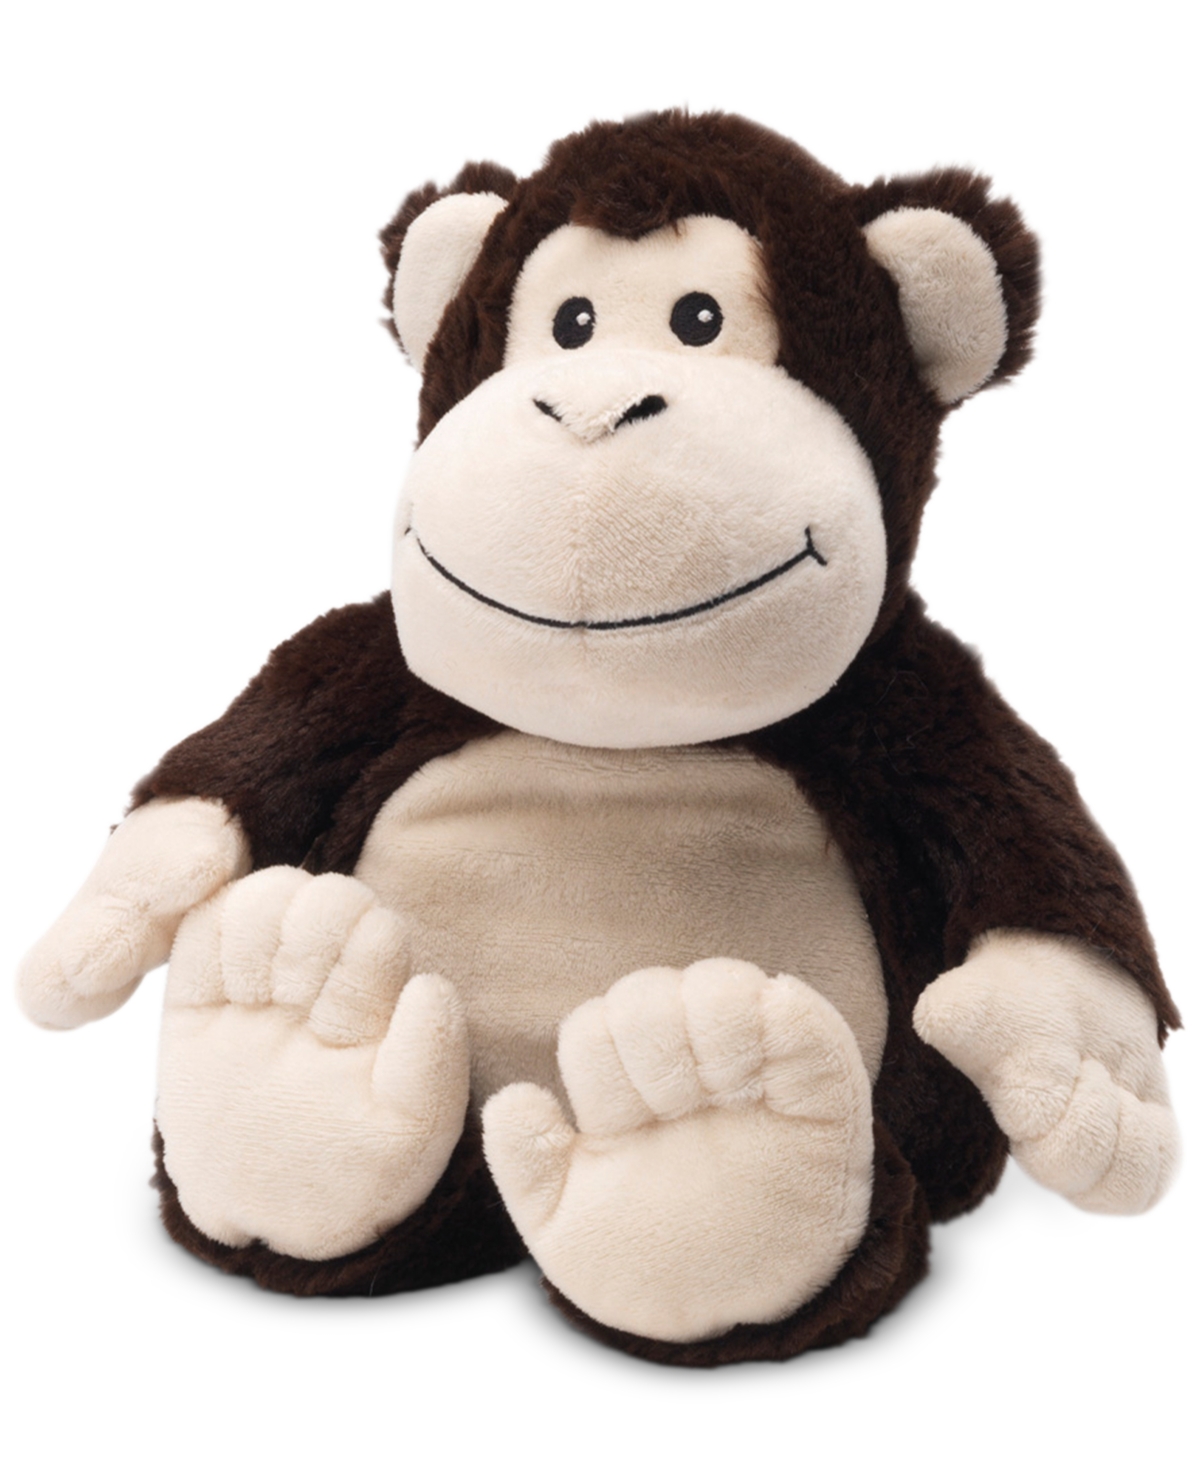 Warmies Monkey Microwavable Plush Toy In Brown